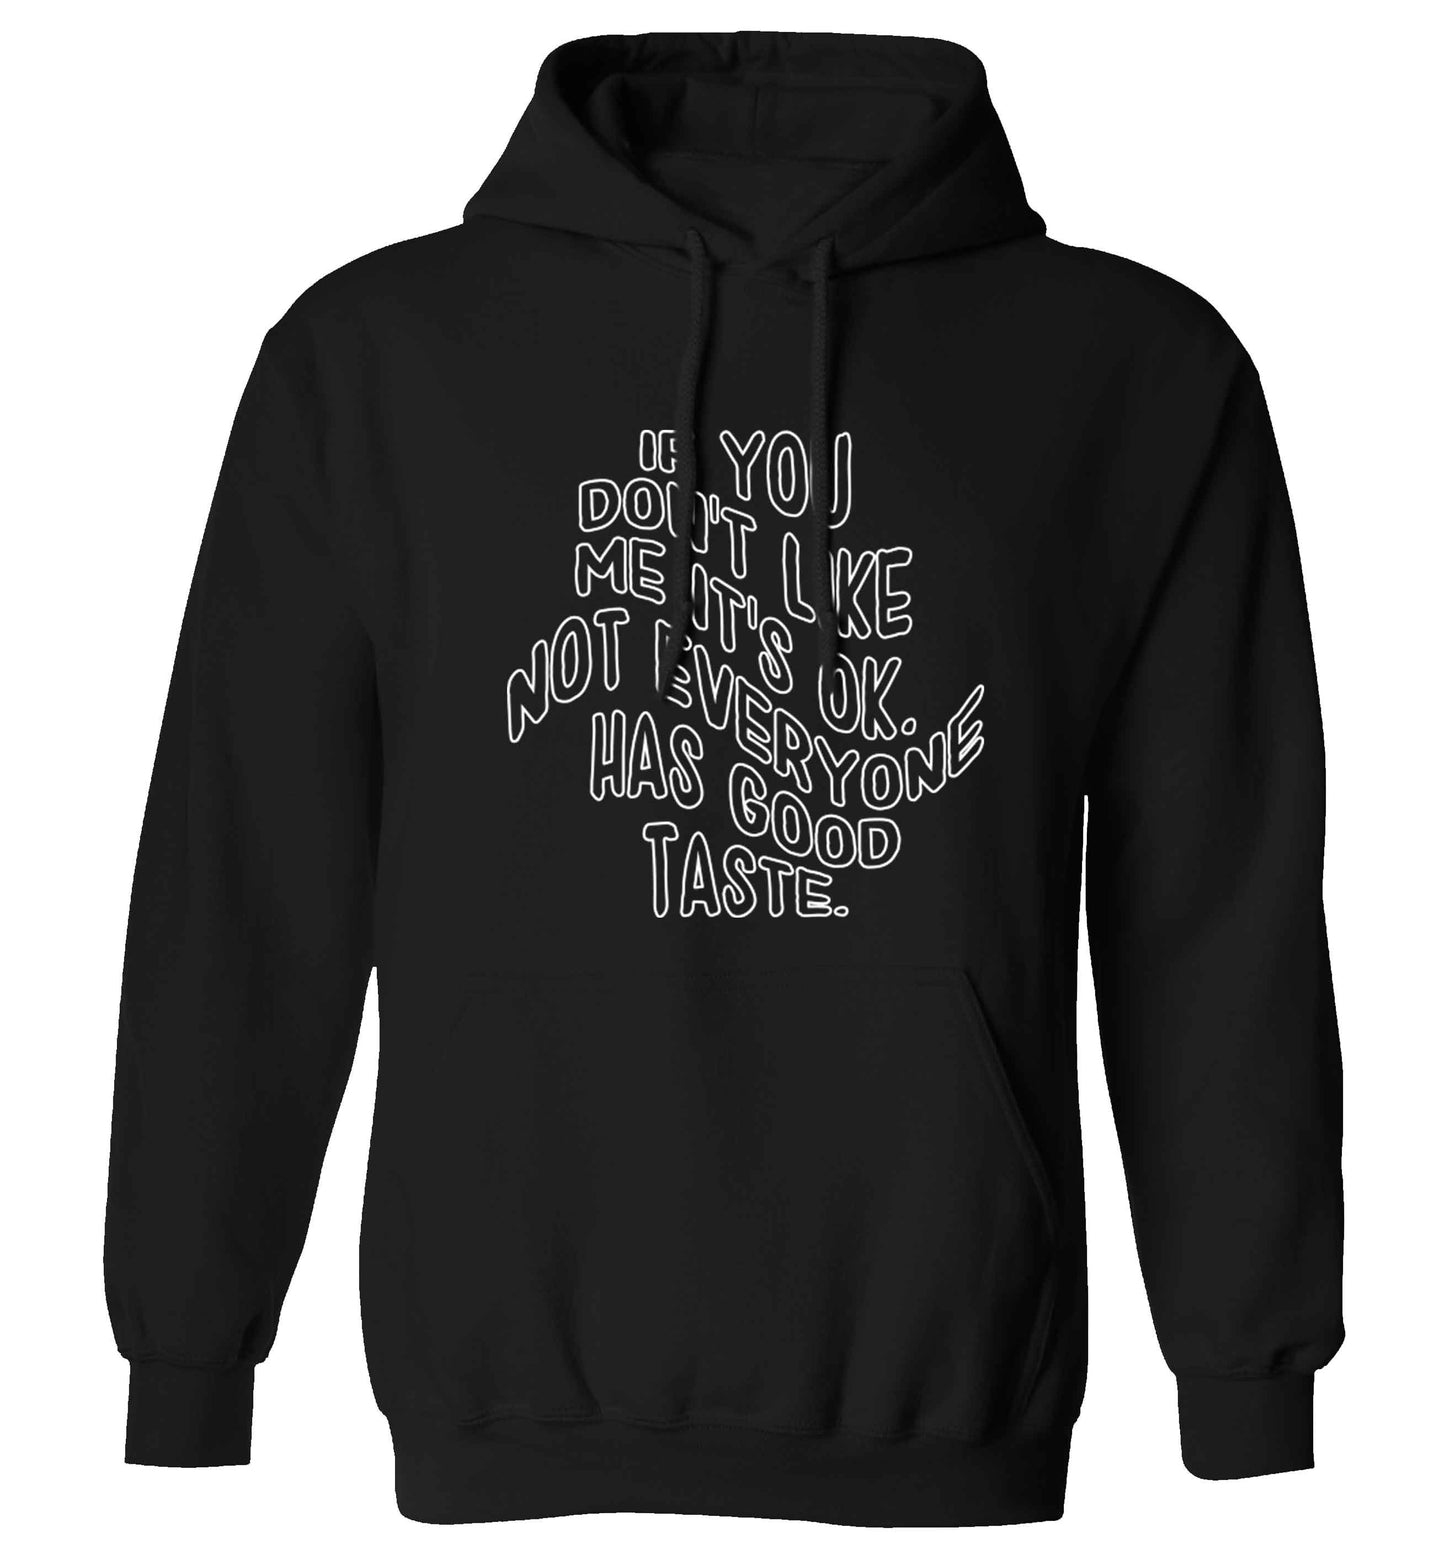 If you don't like me it's ok not everyone has good taste adults unisex black hoodie 2XL